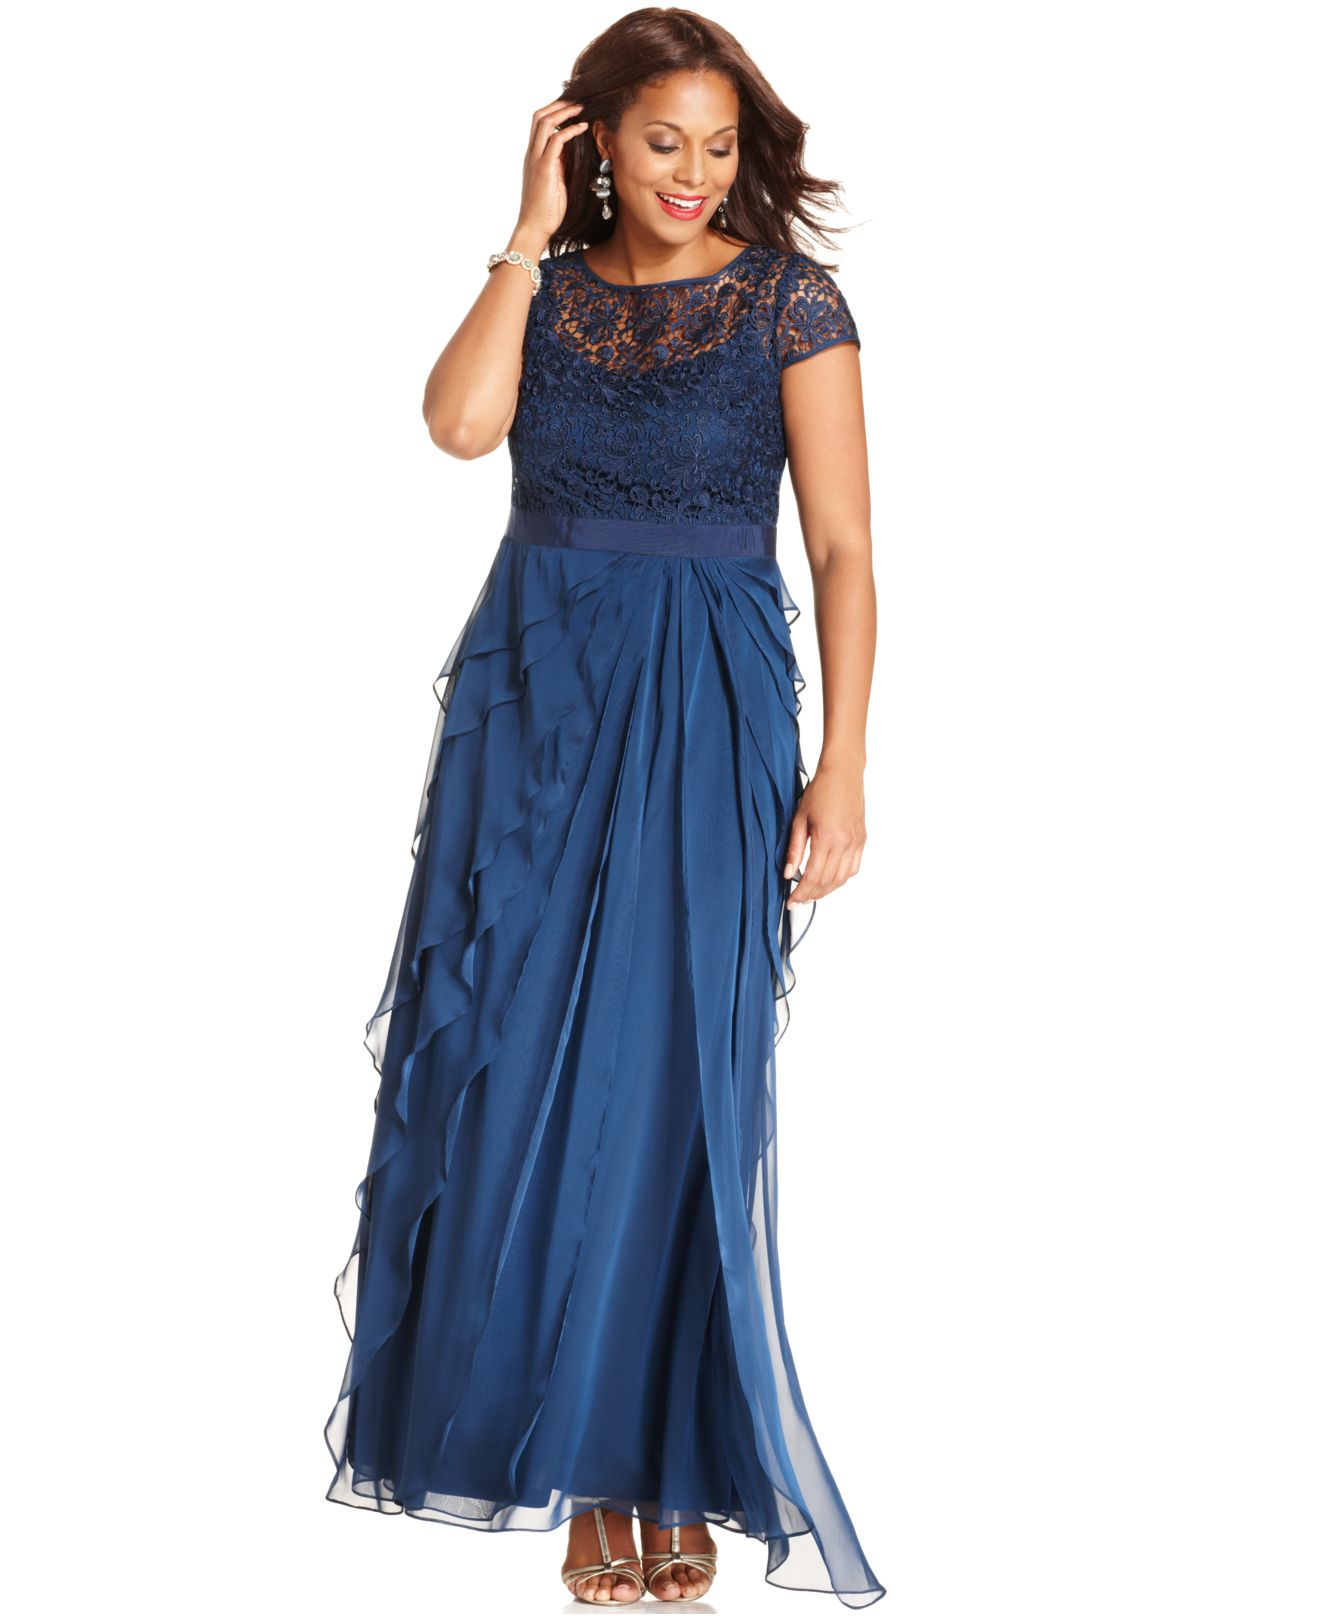 Adrianna Papell Plus Size Cap-sleeve Lace Tiered Gown in Navy (Blue) - Lyst